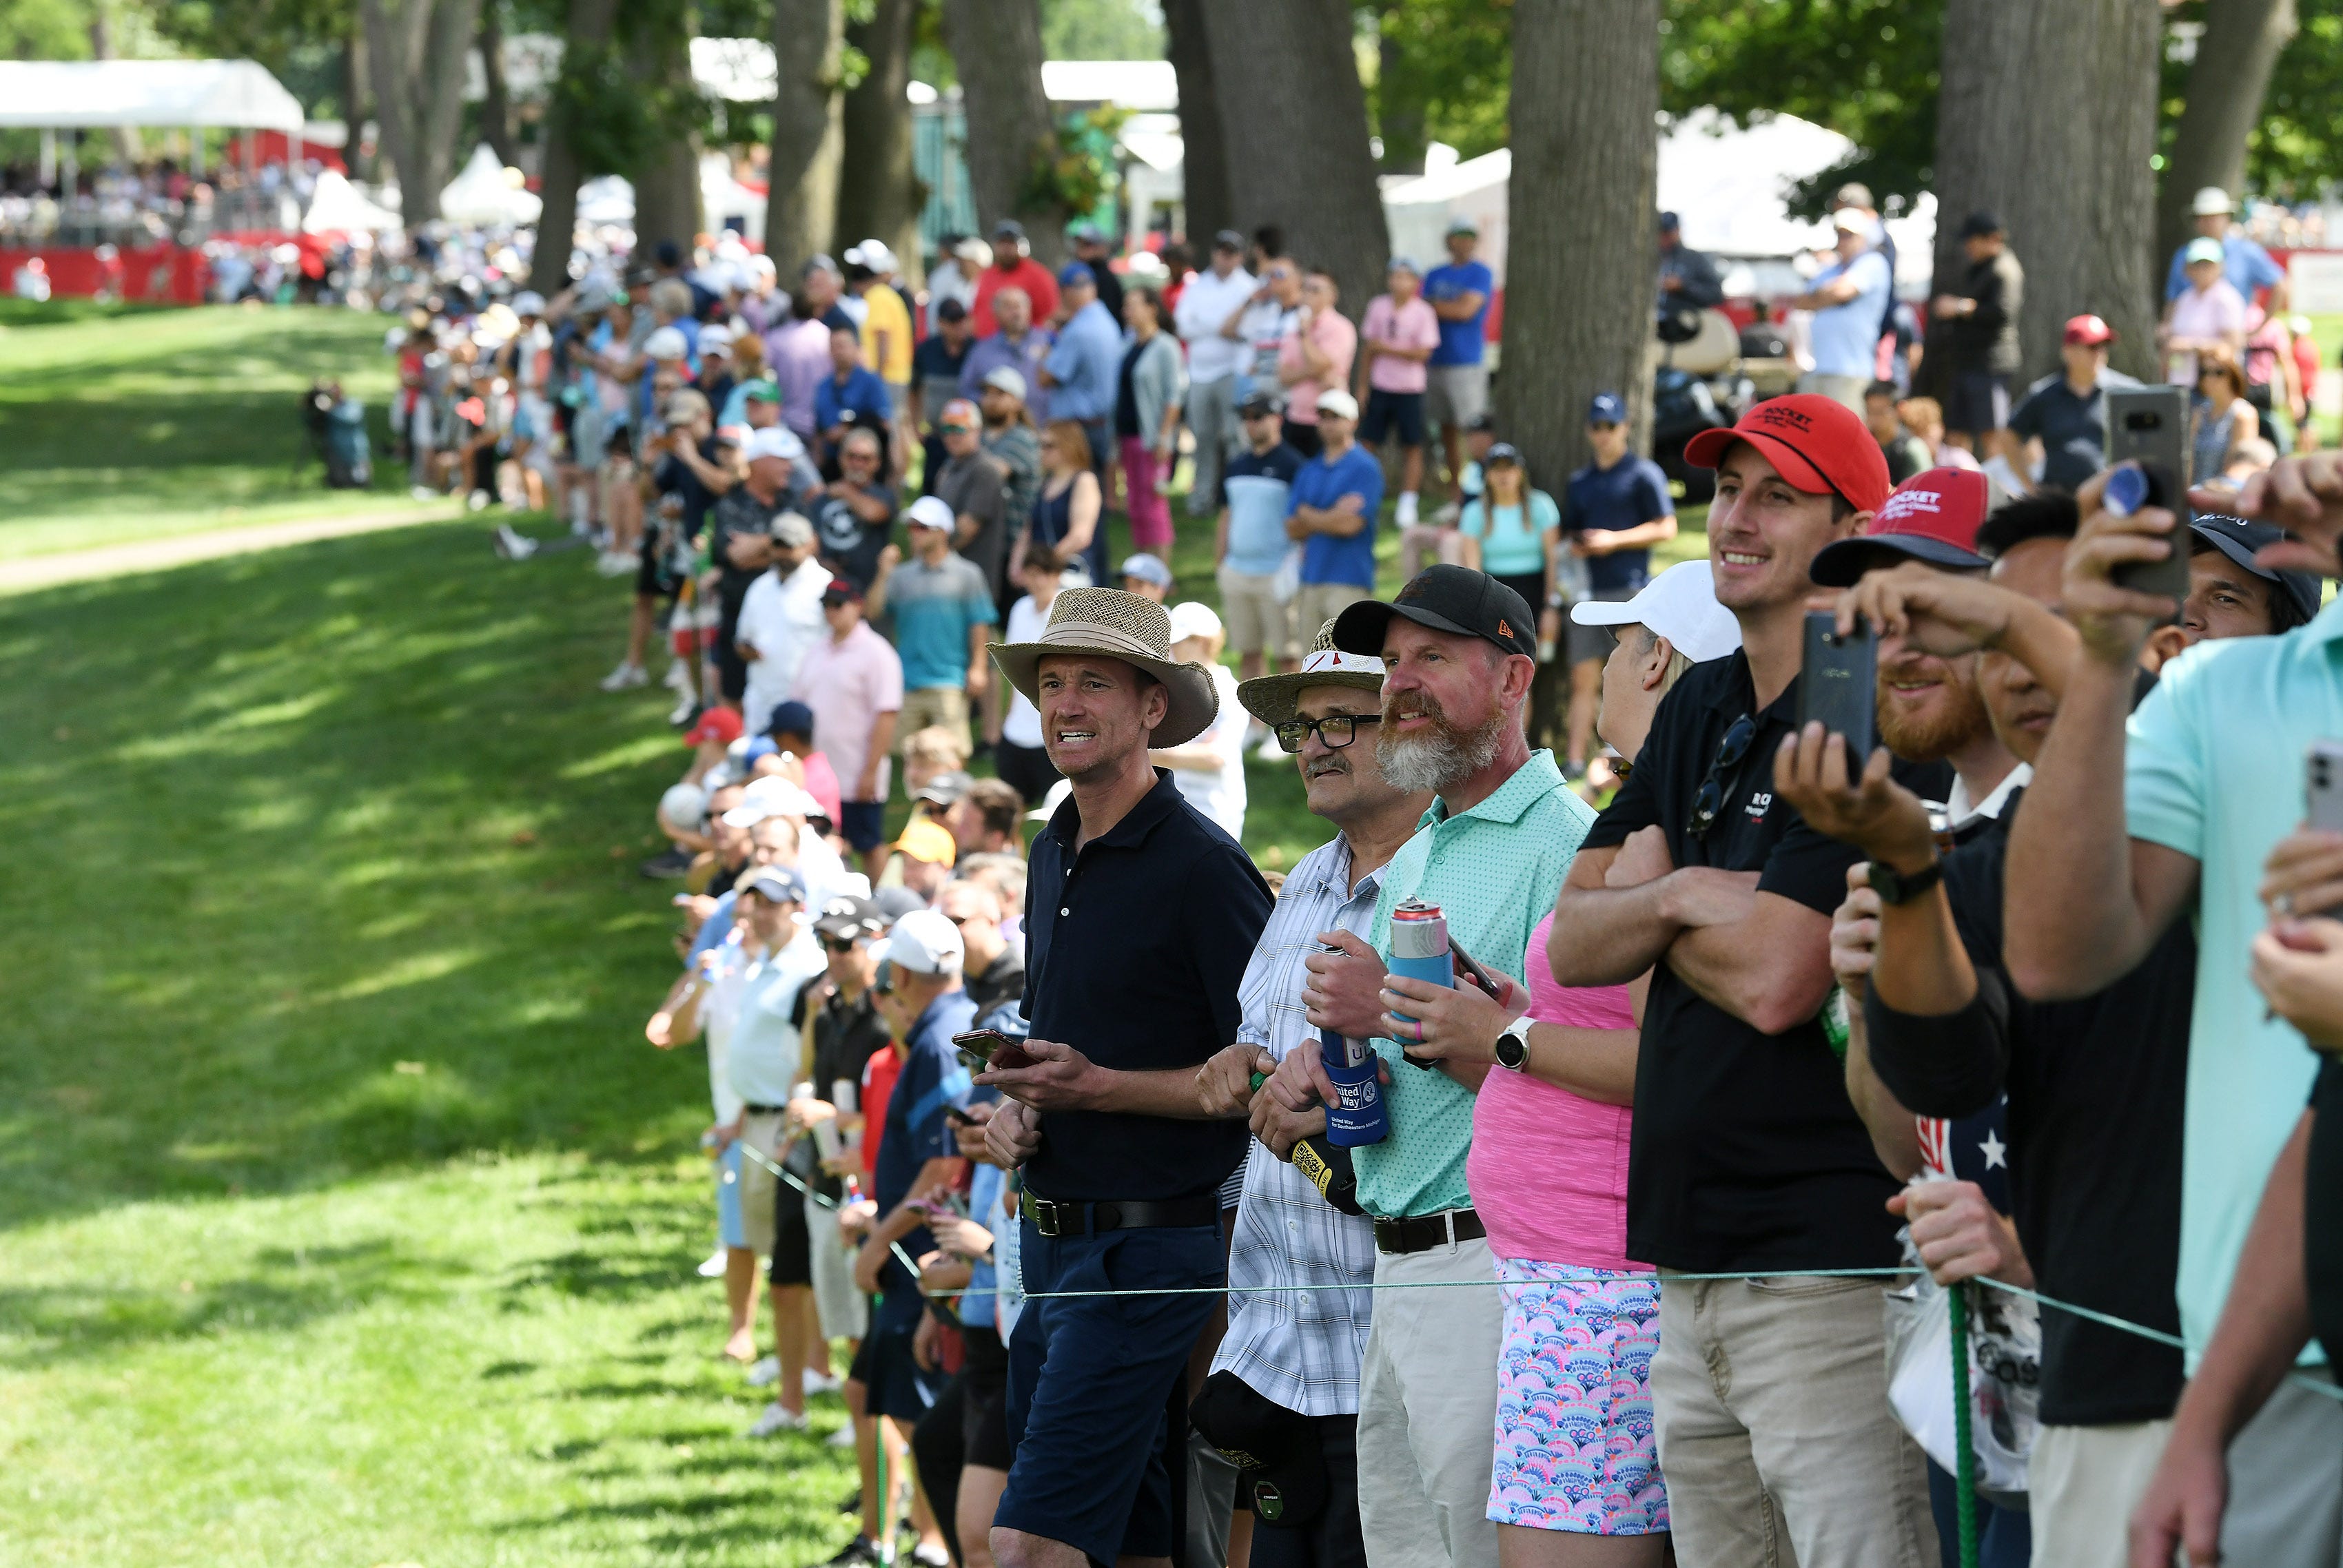 Fans watch and some cheer for Phil Mickelson as he walks up the ninth fairway.